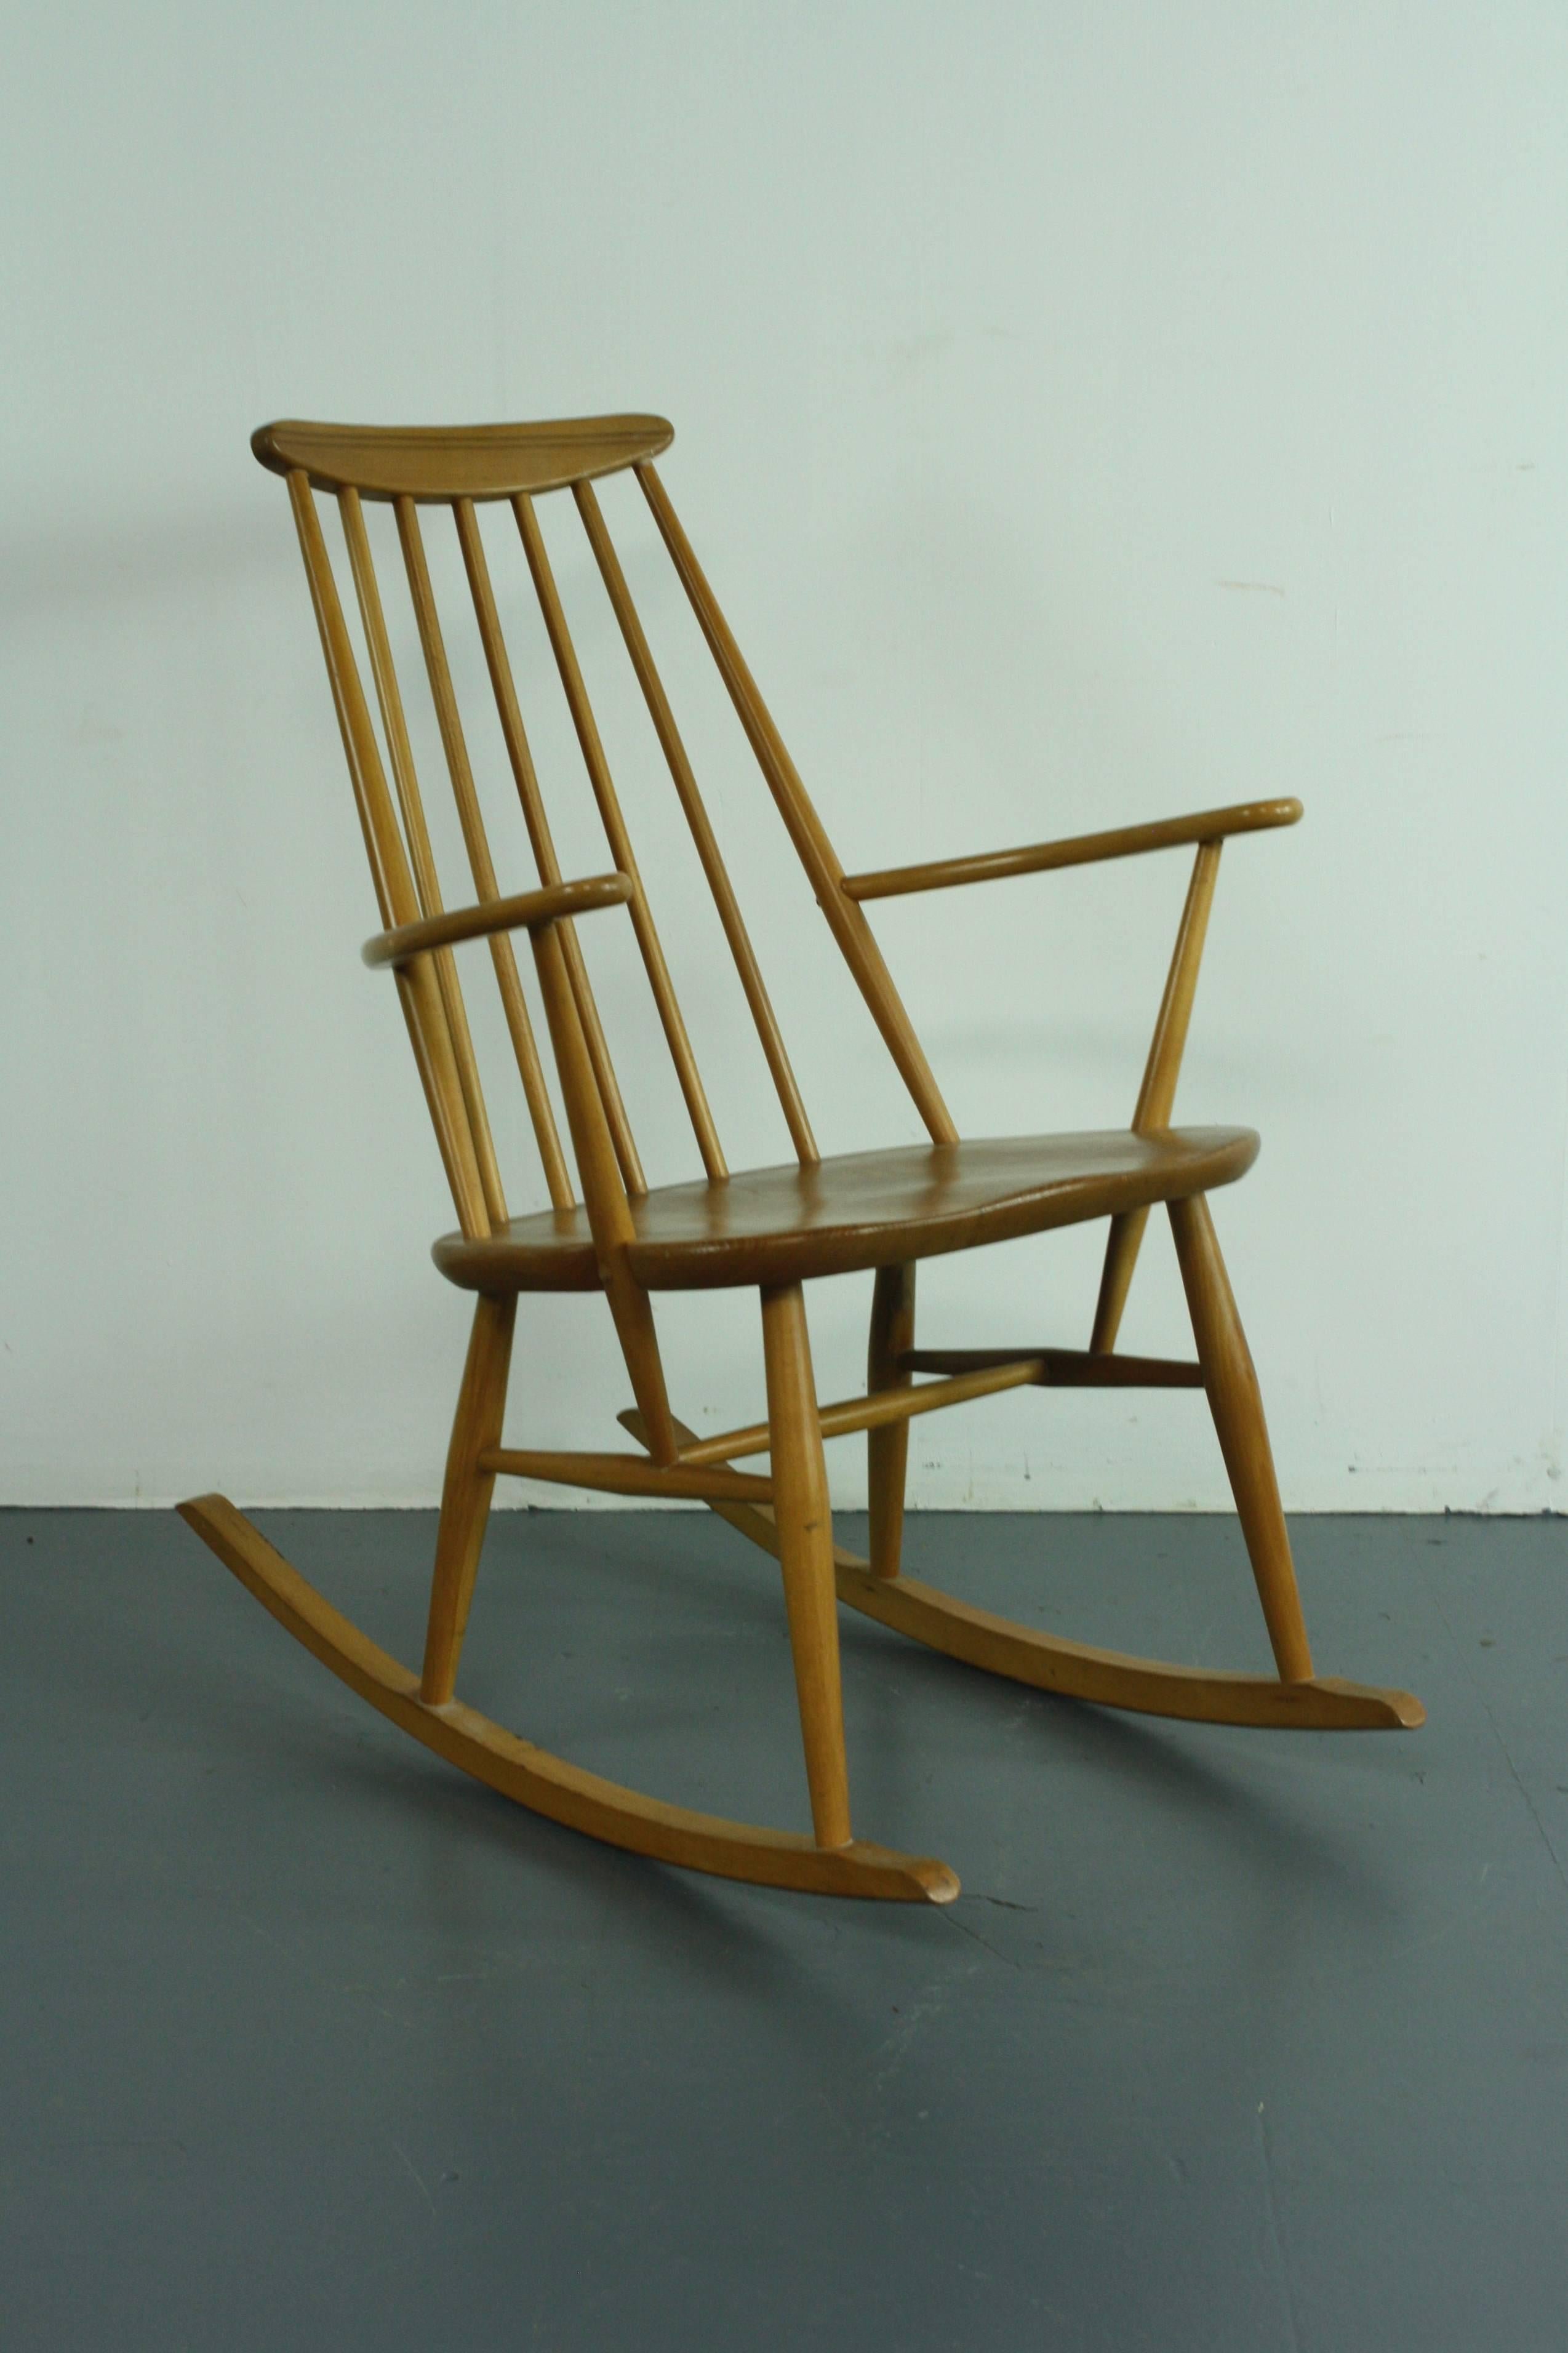 Lovely early Ercol rocking chair in blonde elm.

In good vintage condition; some signs of wear and tear, commensurate with age, but nothing which detracts. 

Approximate dimensions:

Height: 90cm

Width: 63cm

Depth: 81cm

Seat height: